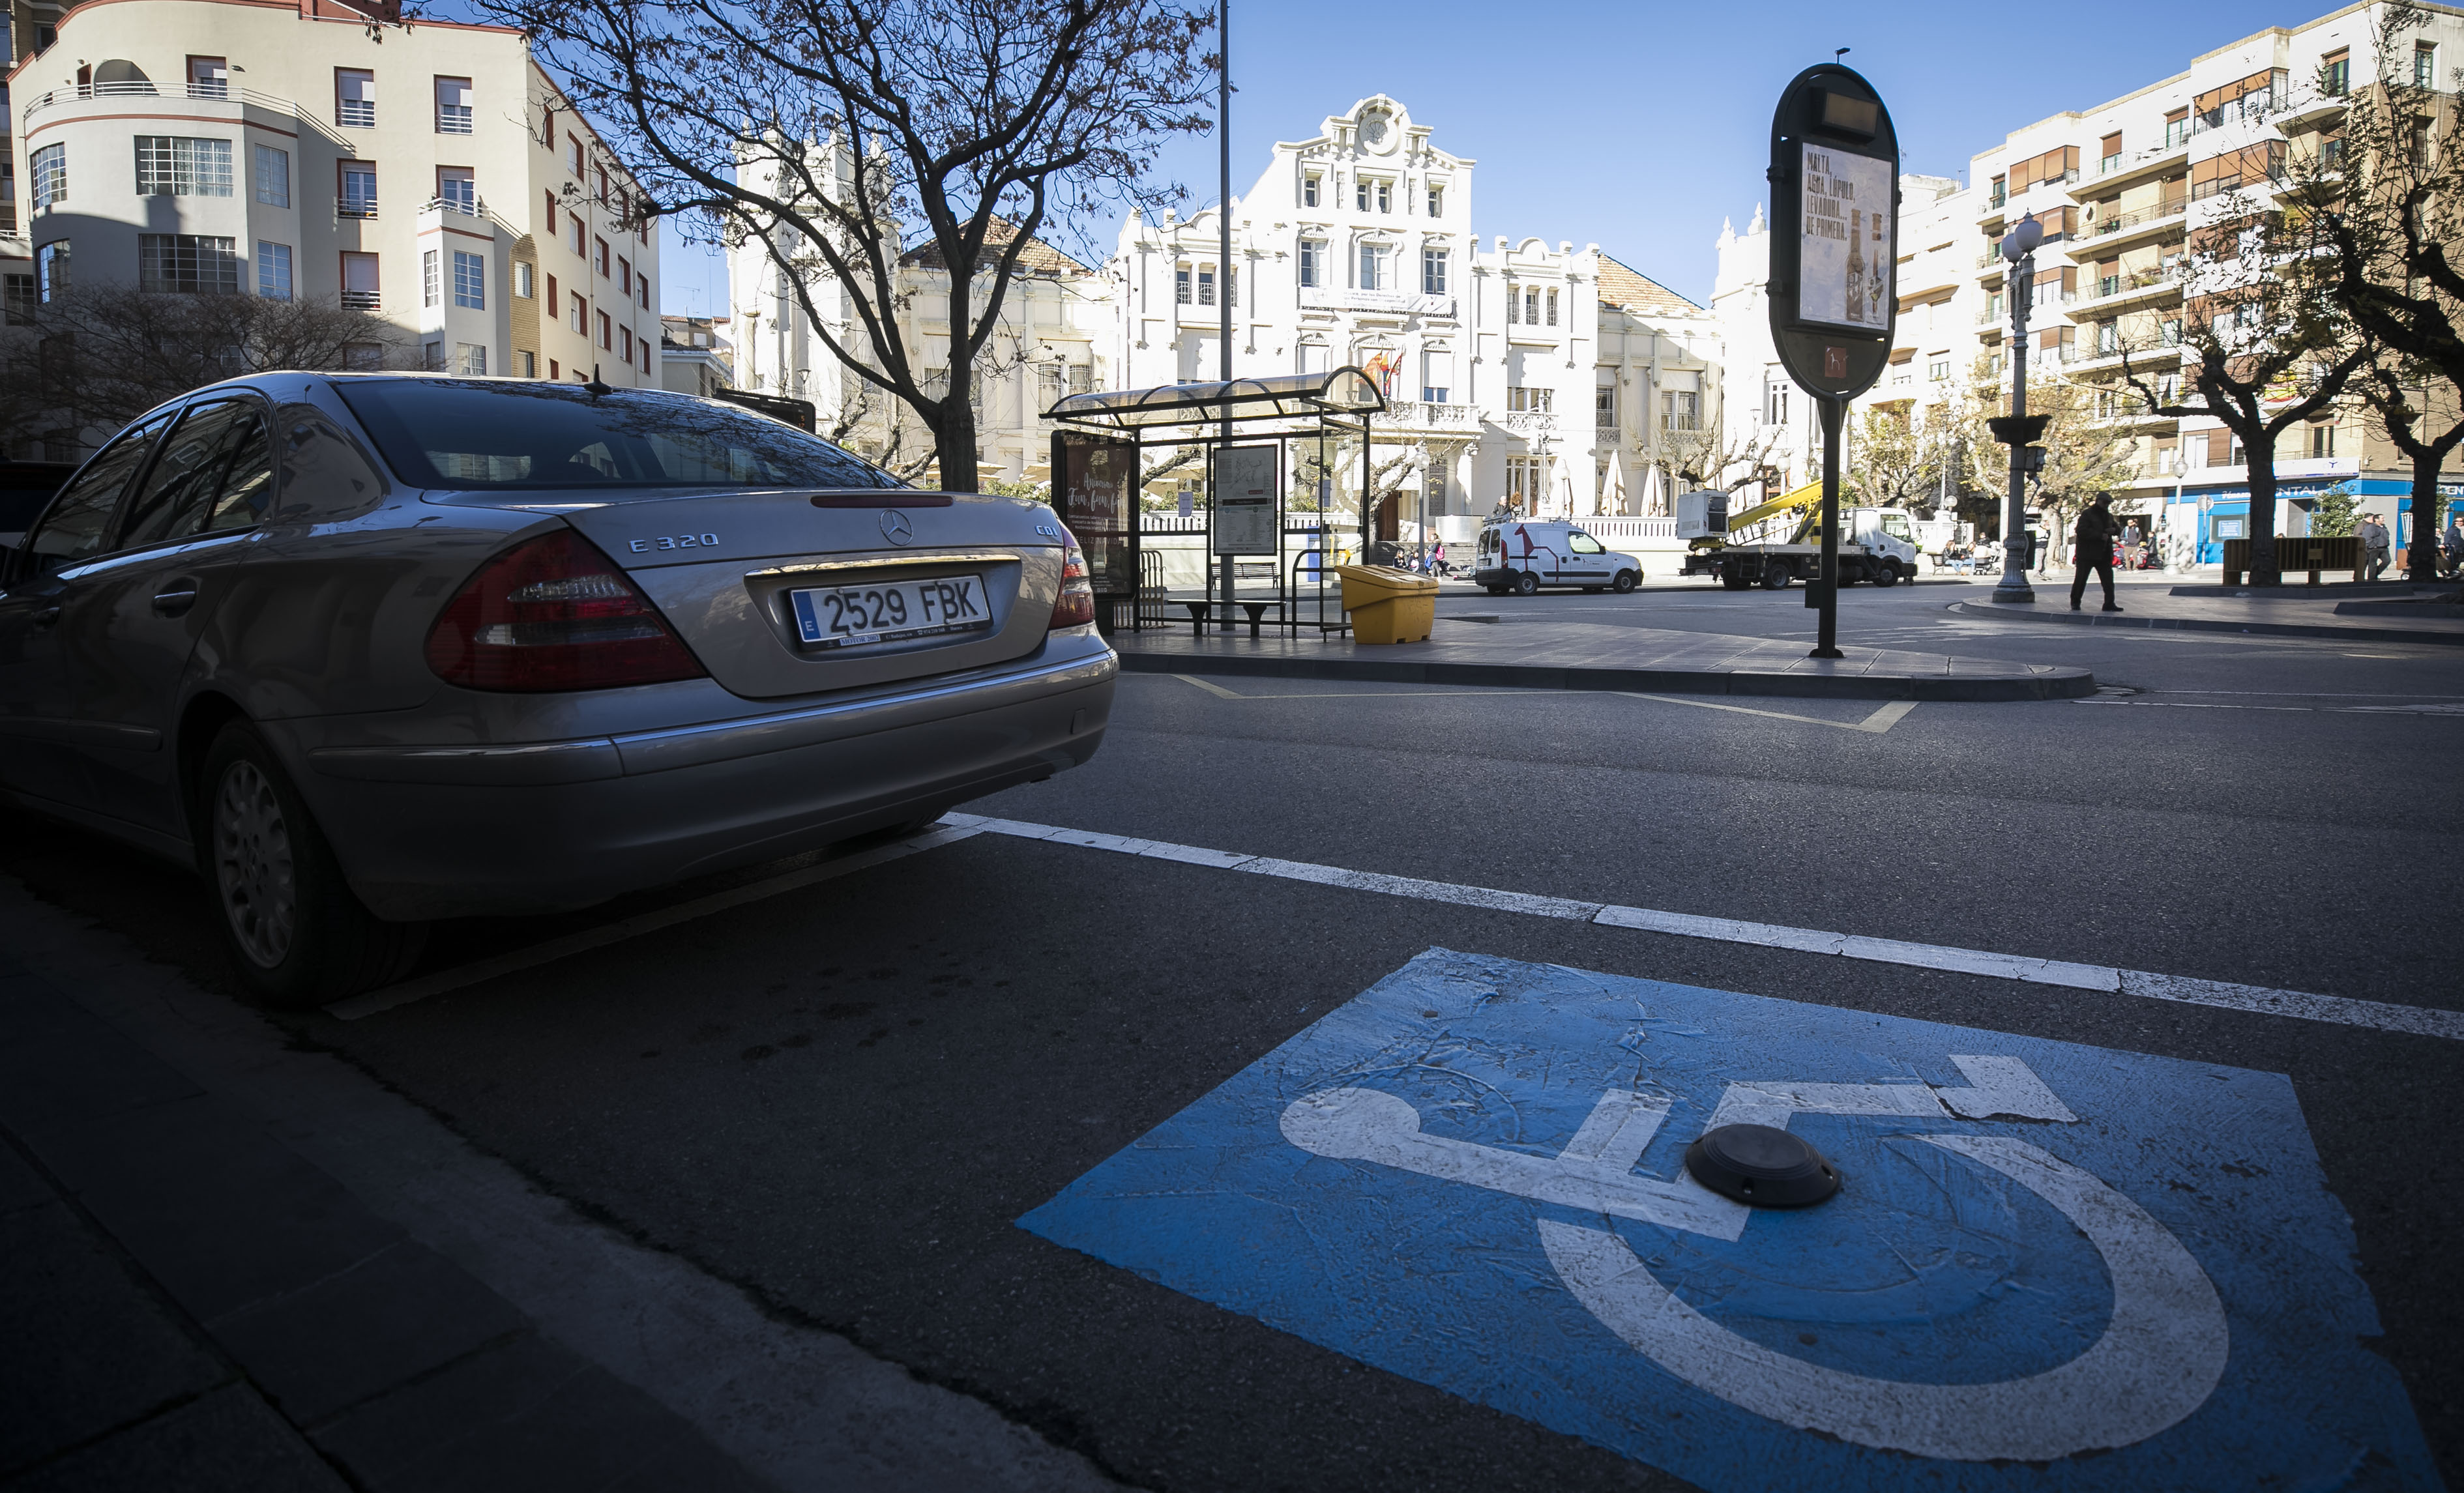 Libelium’s smart parking sensor solution has been installed in 190 disabled parking bays to ensure there are enough spaces for those that need them.